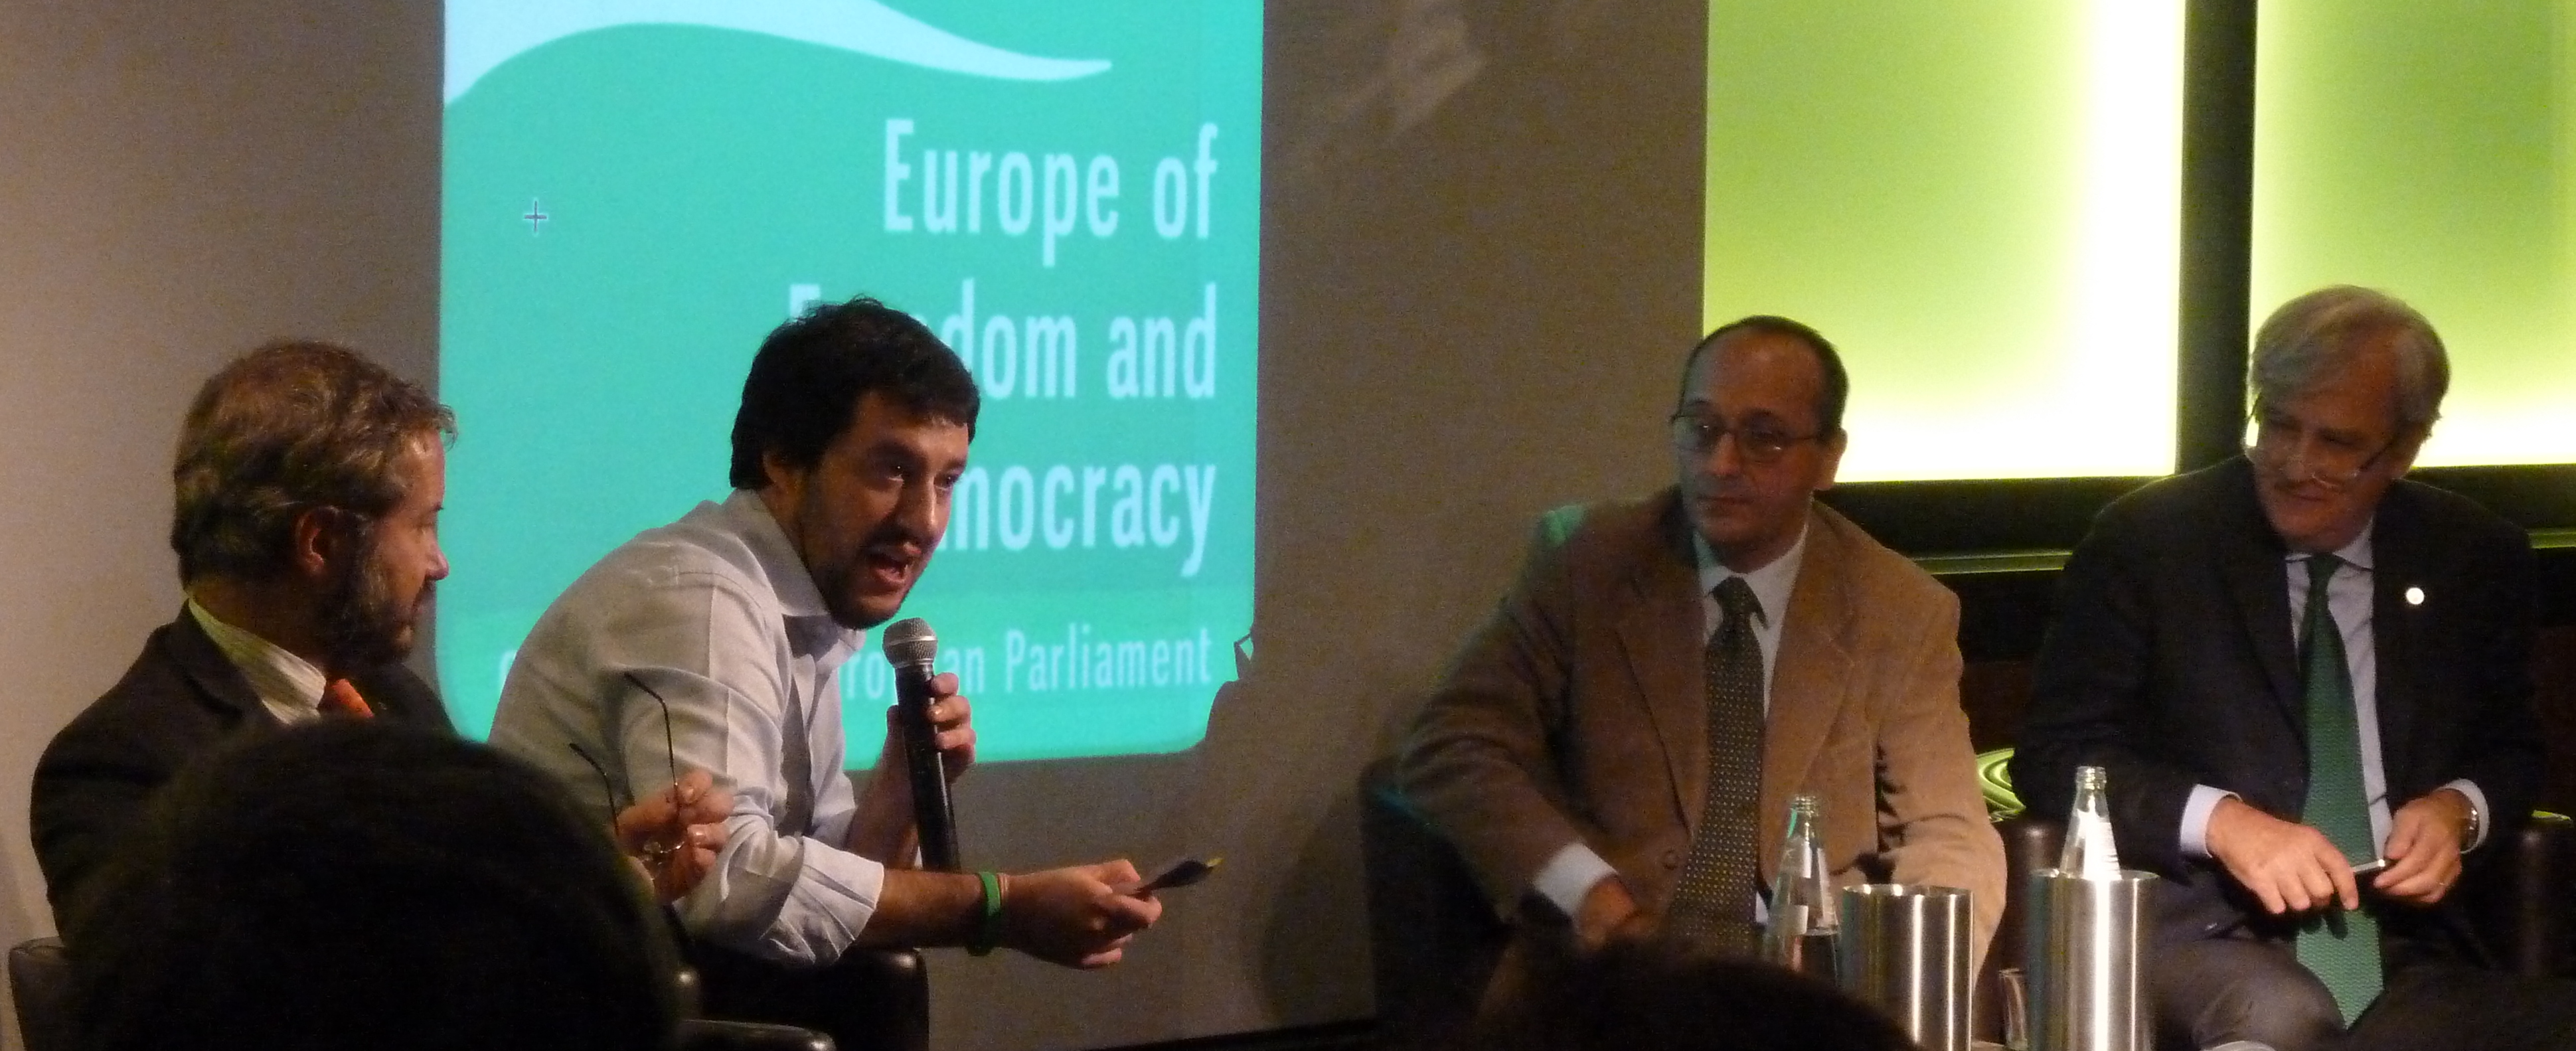 Salvini with microphone in 2013. (Wikimedia Commons)